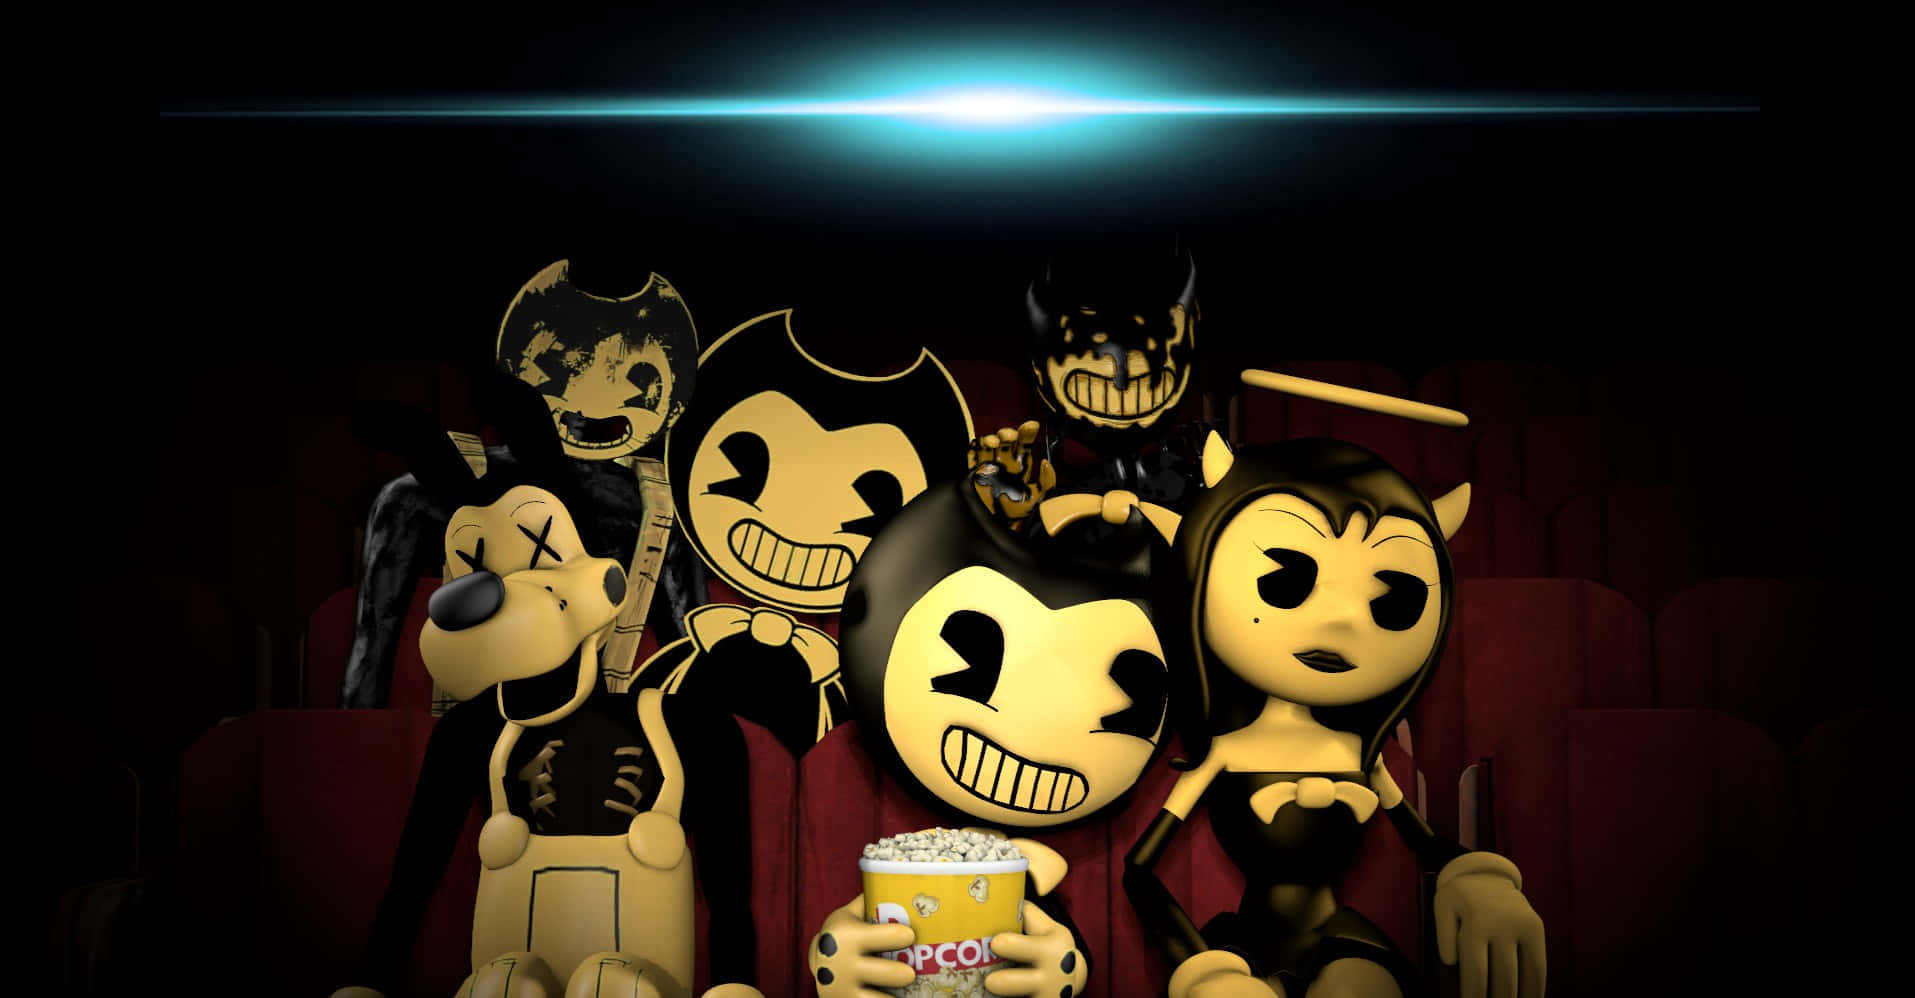 Bendy and the Ink Machine (Mac) - Download